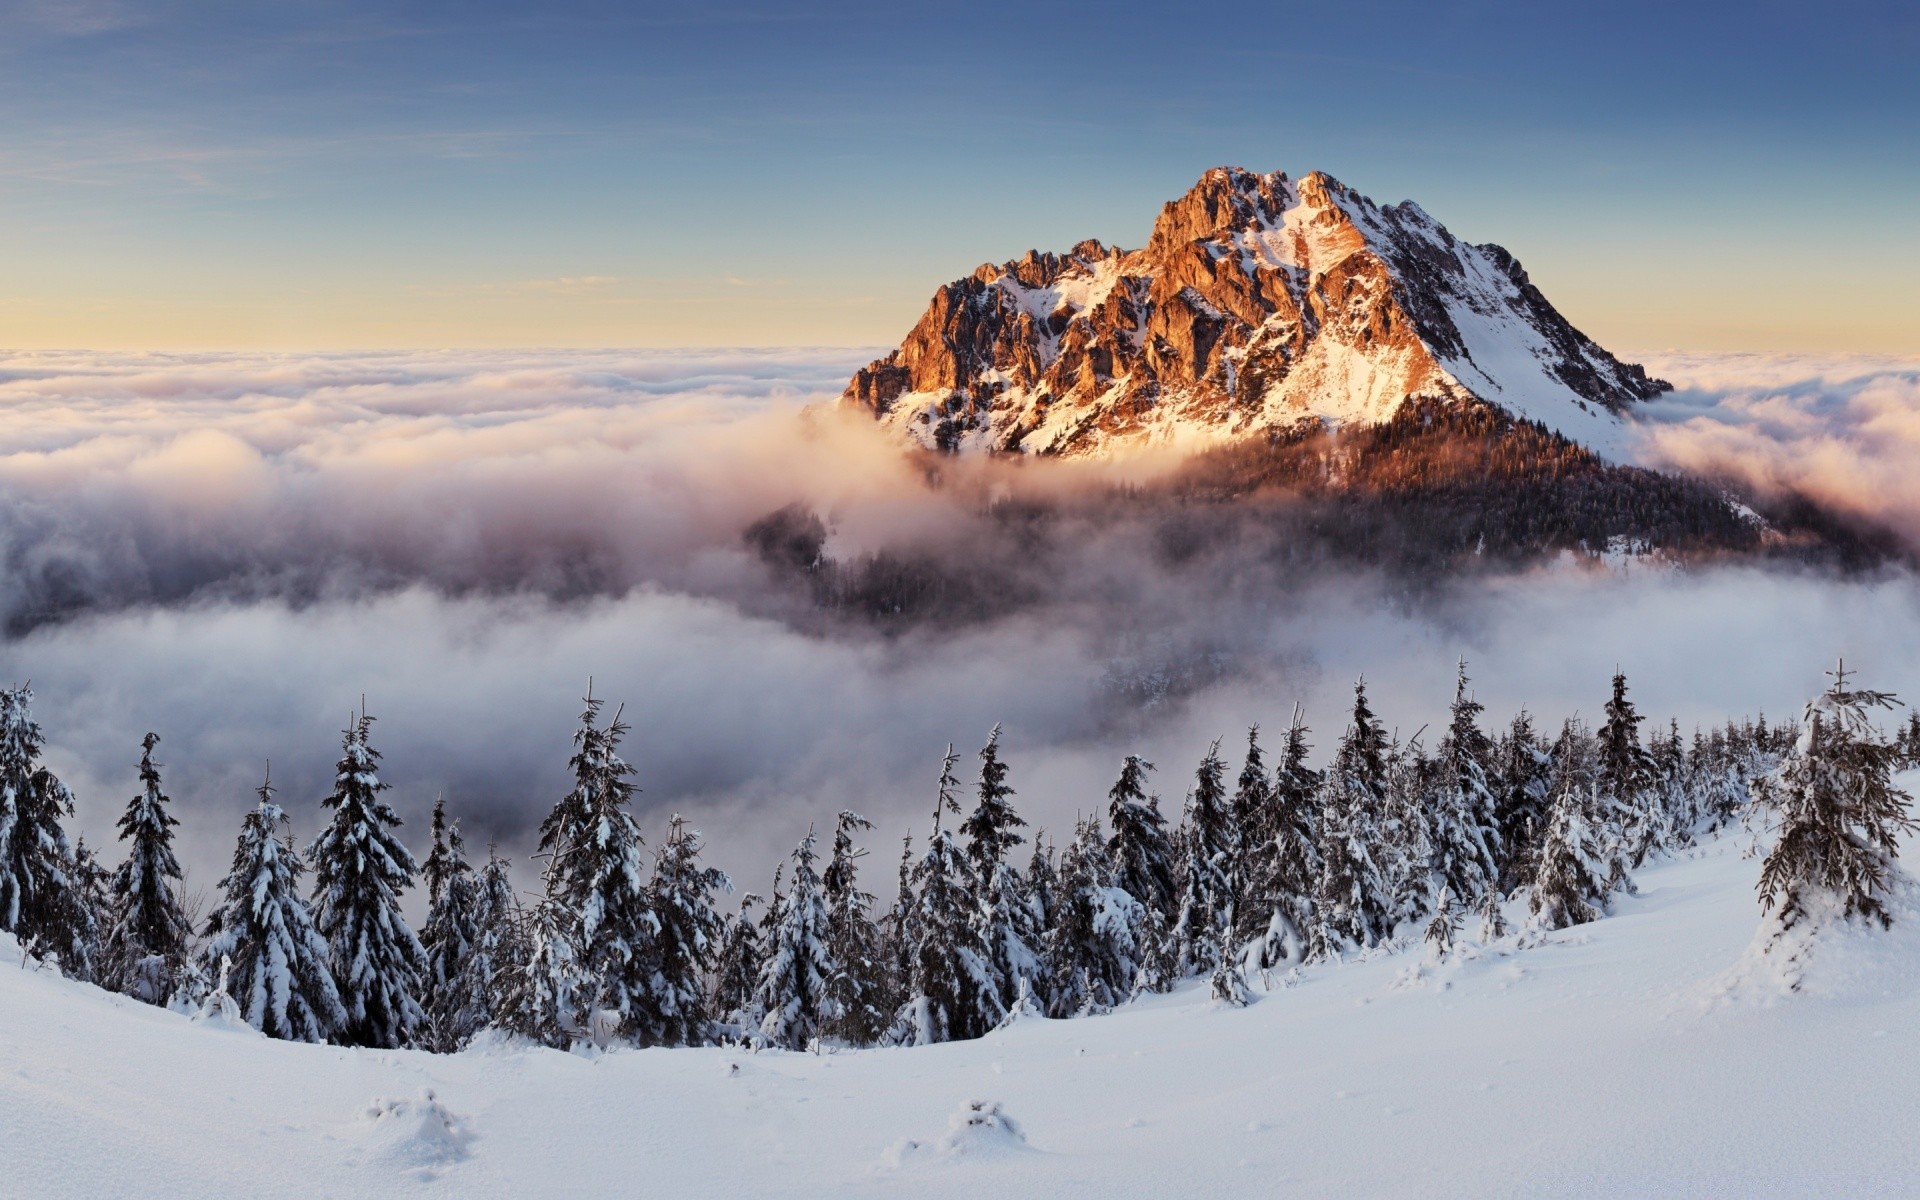 mountains snow mountain winter landscape cold scenic ice sky nature outdoors wood pinnacle hill fair weather mountain peak